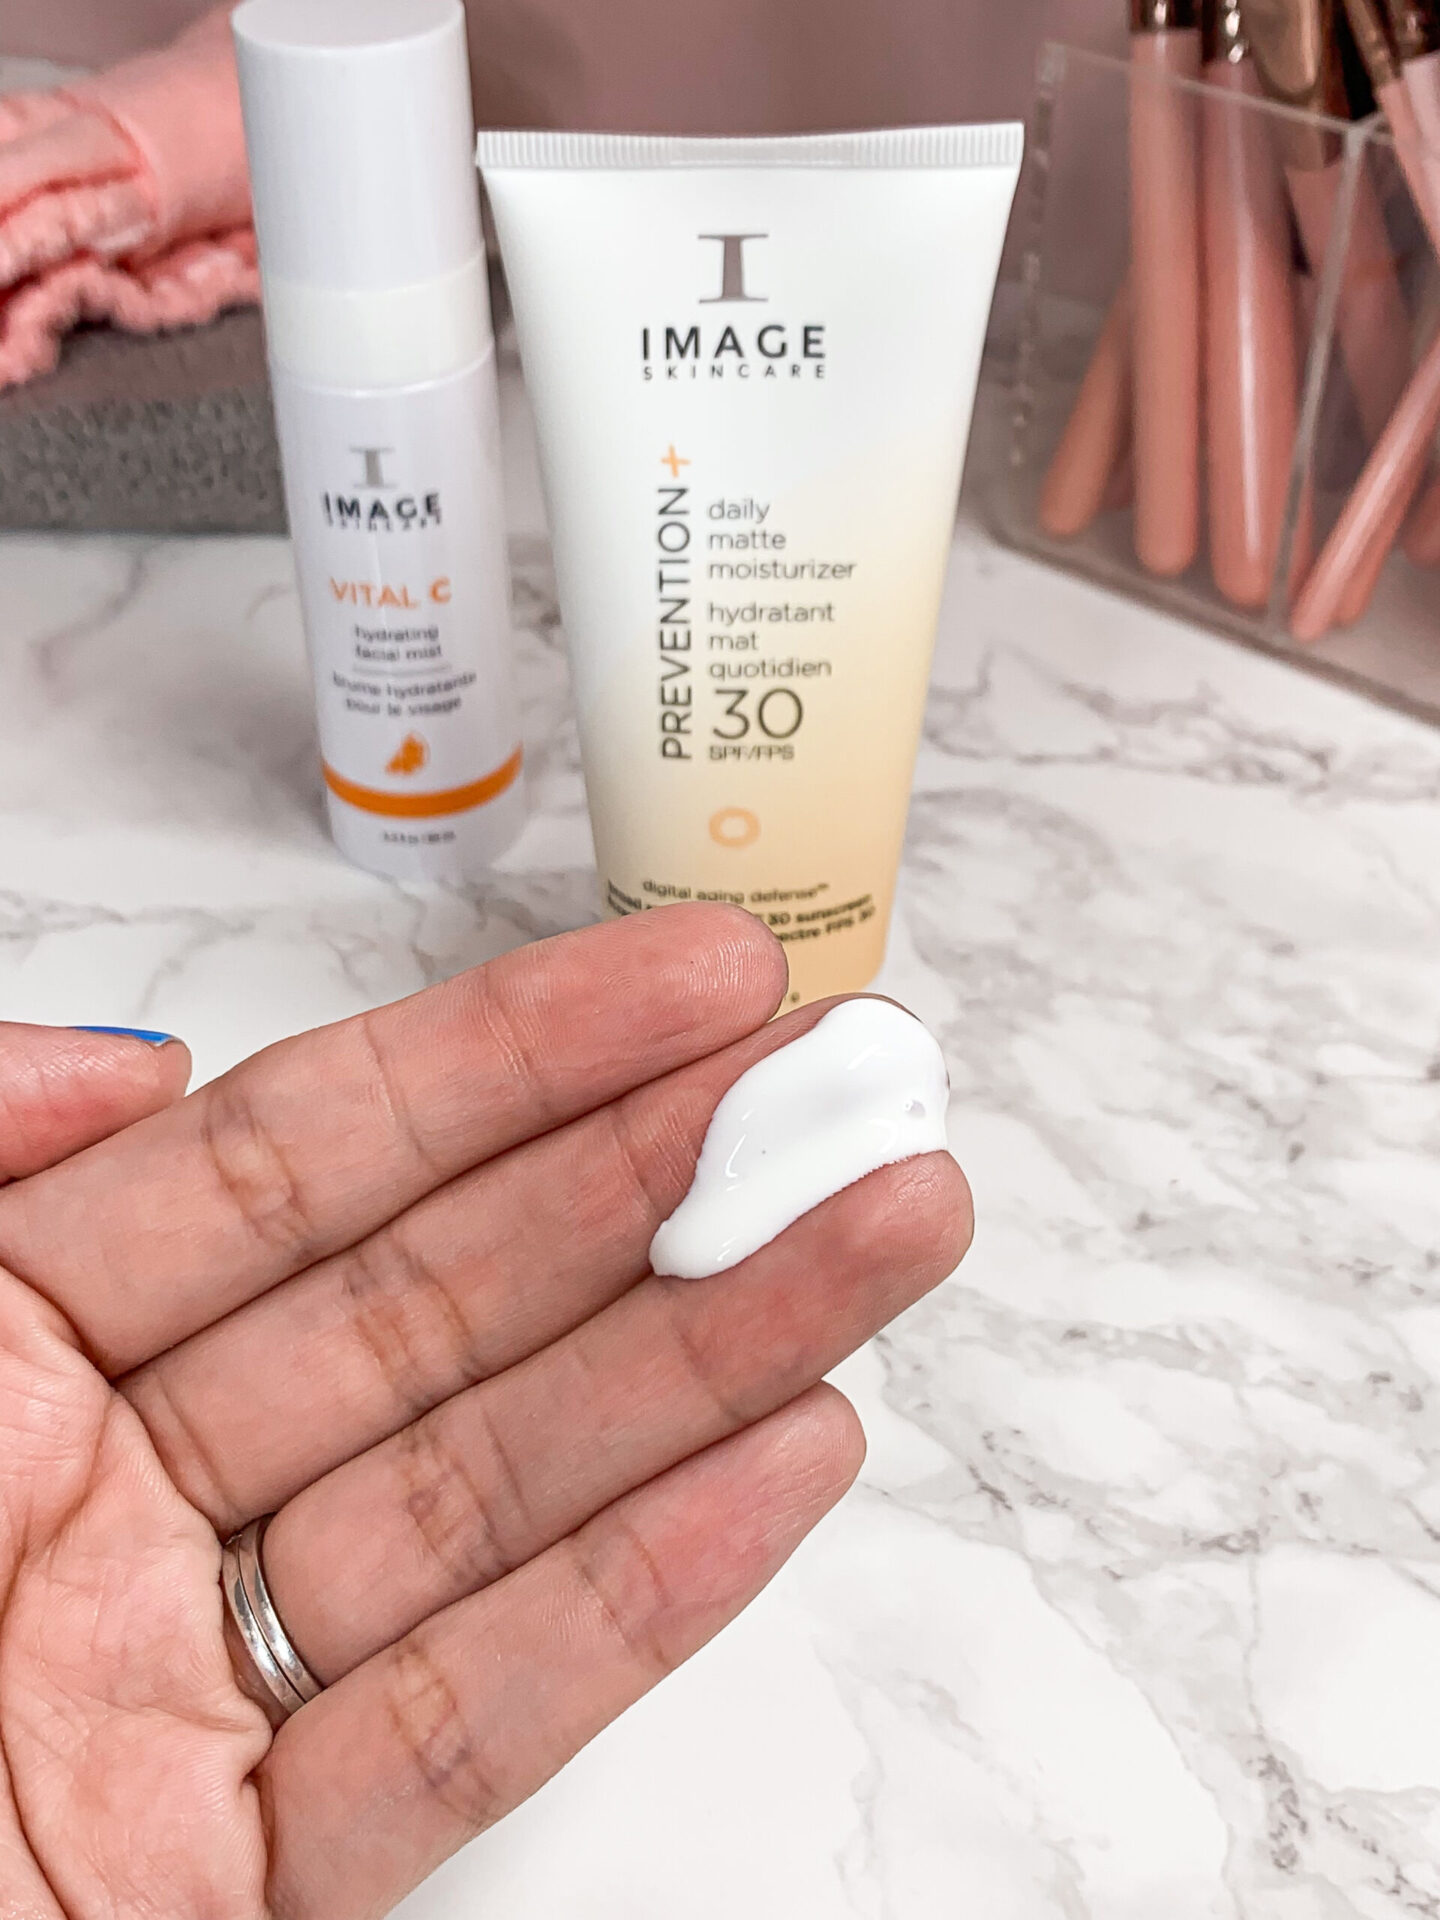 How To Prep For Summer // Summer Beauty Essentials // Summer Must Haves | Beauty With Lily #ad #Prep4SummerBBxx #amope #givefeetmorelove #TFB #InvestInYourself #TheGirlWhoSurvived #TheWifeBefore #WearableWellness #TheGoodPatch @daxhaircare #daxnaturals #daxfornaturals #daxforallhair #daxhaircare #daxhair #imperialdax #daxmadeinamerica @imageskincare #imageskincare